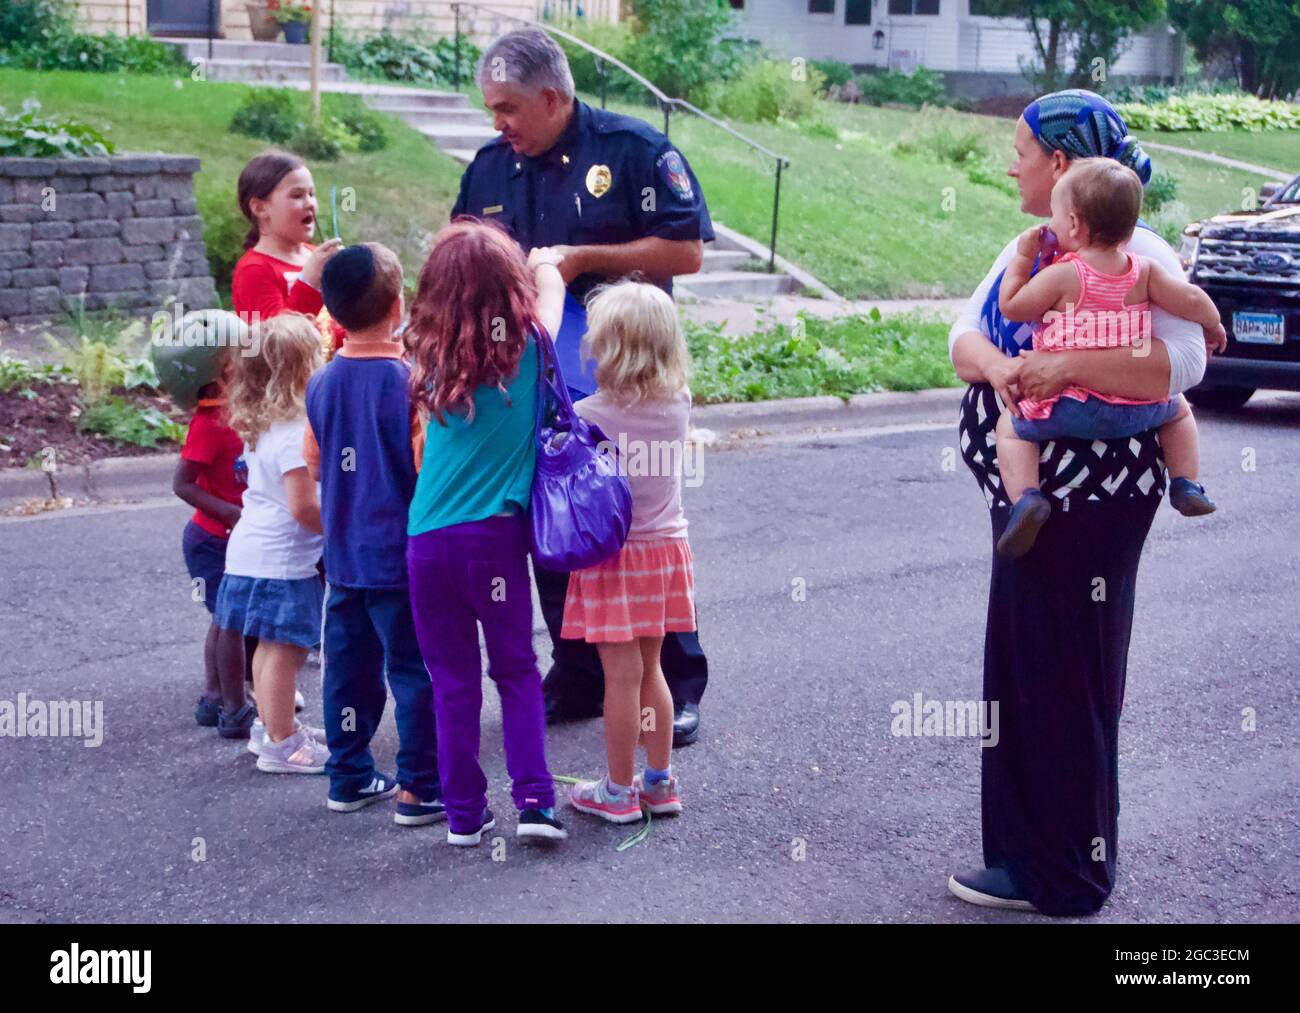 National Night Out block party in St. Louis Park, Minnesota. Diverse neighborhood gathering with children. Stock Photo